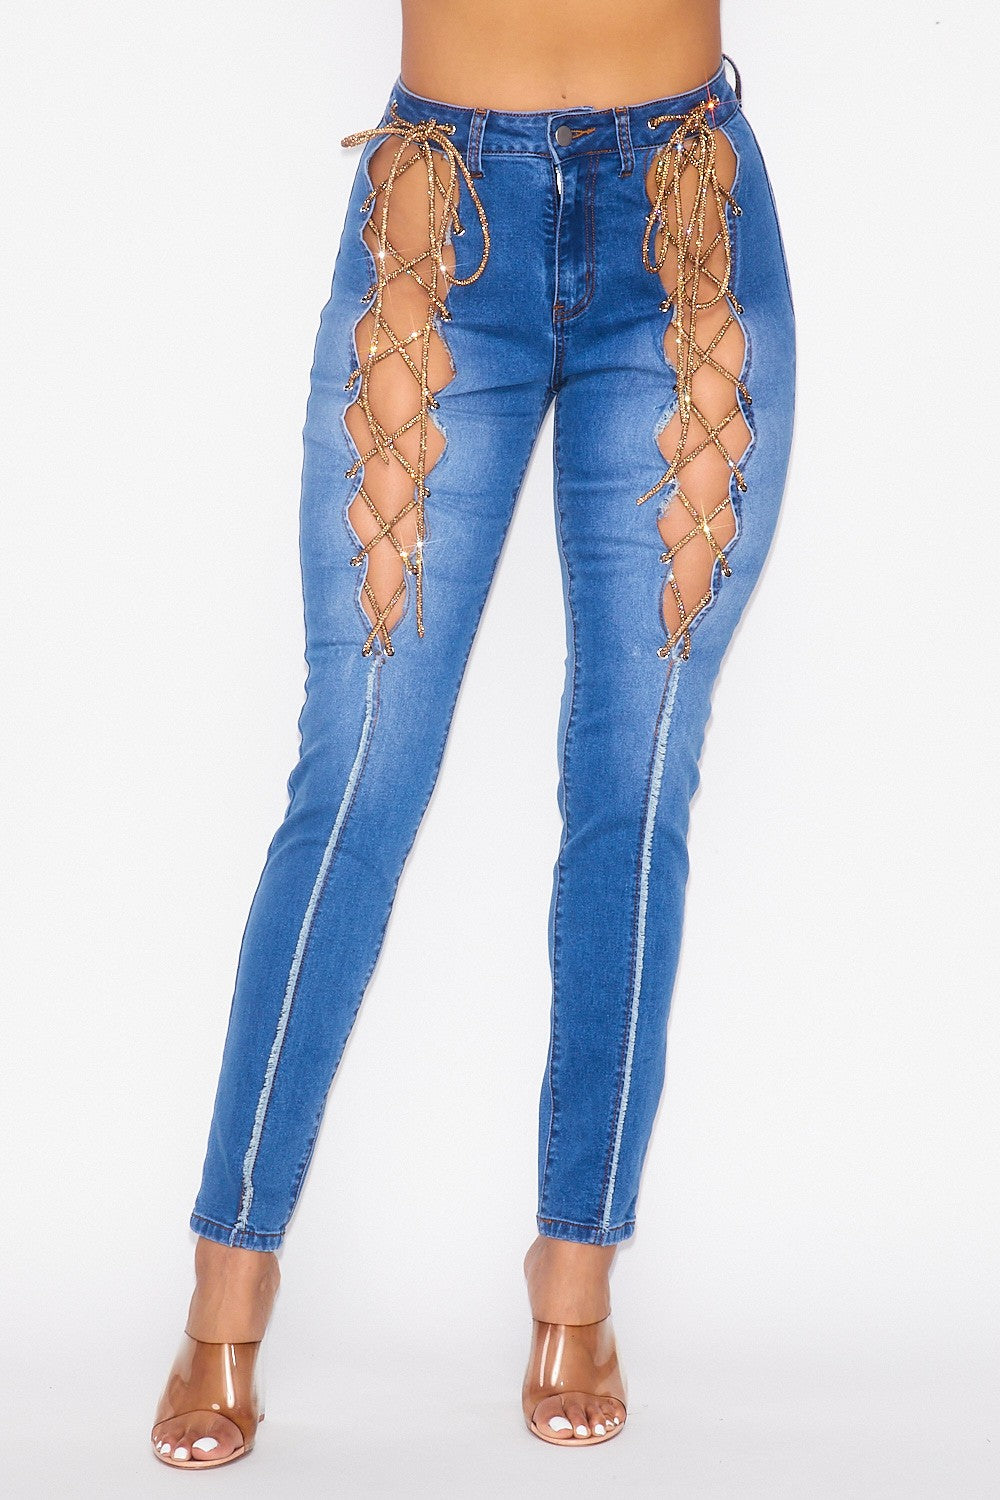 Back in Love Lace-up Jeans